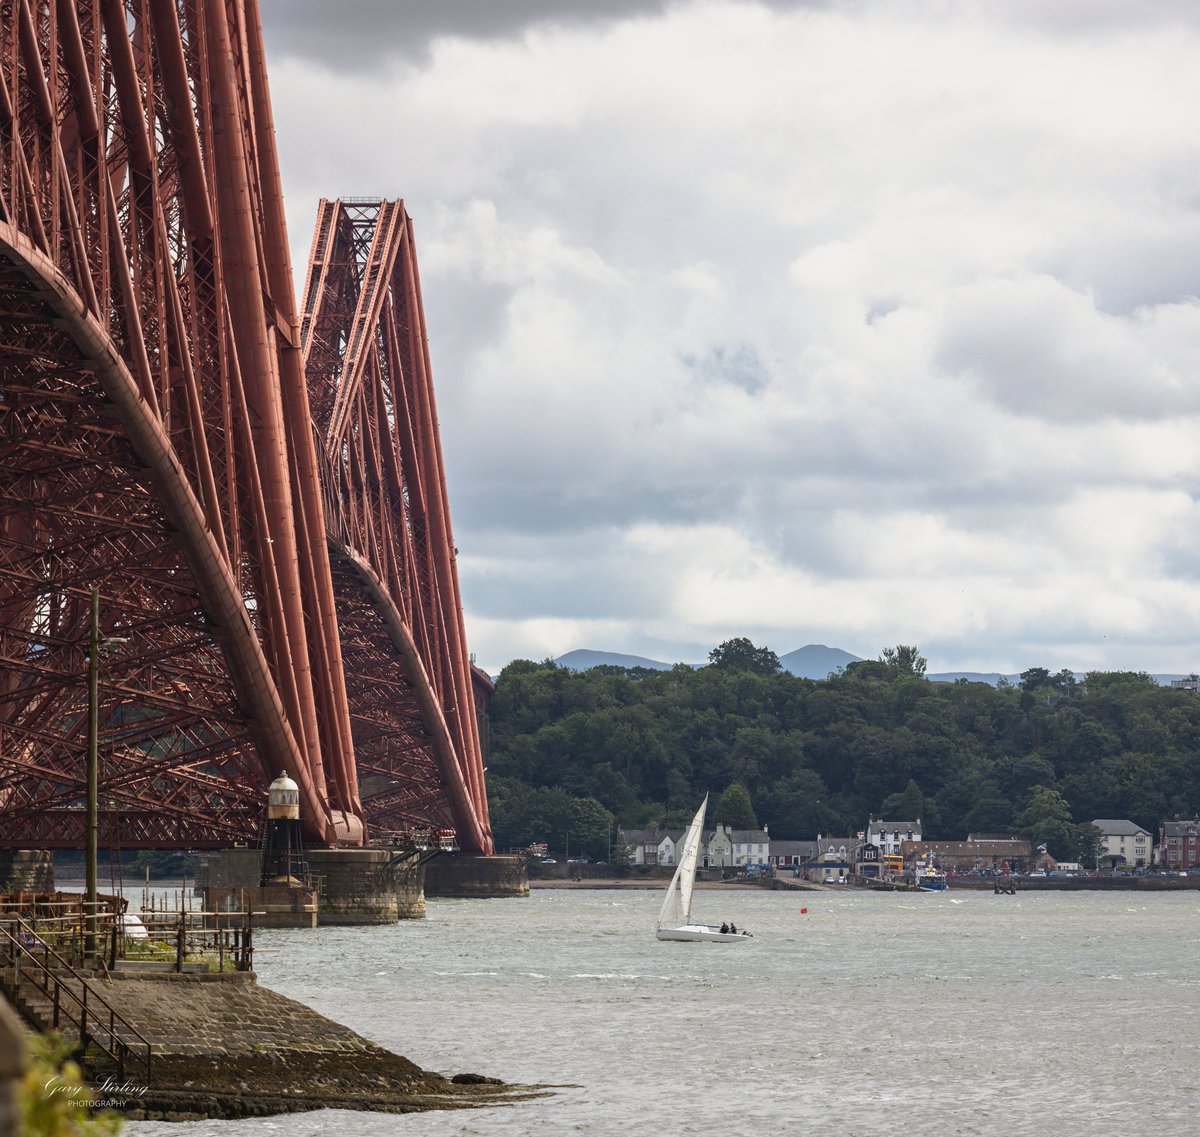 Got to love the Forth Rail Bridge as a backdrop.  From North Queensferry. 
@welcometofife @VisitScotland @LoveDunfermline #forthbridge #forthrailbridge